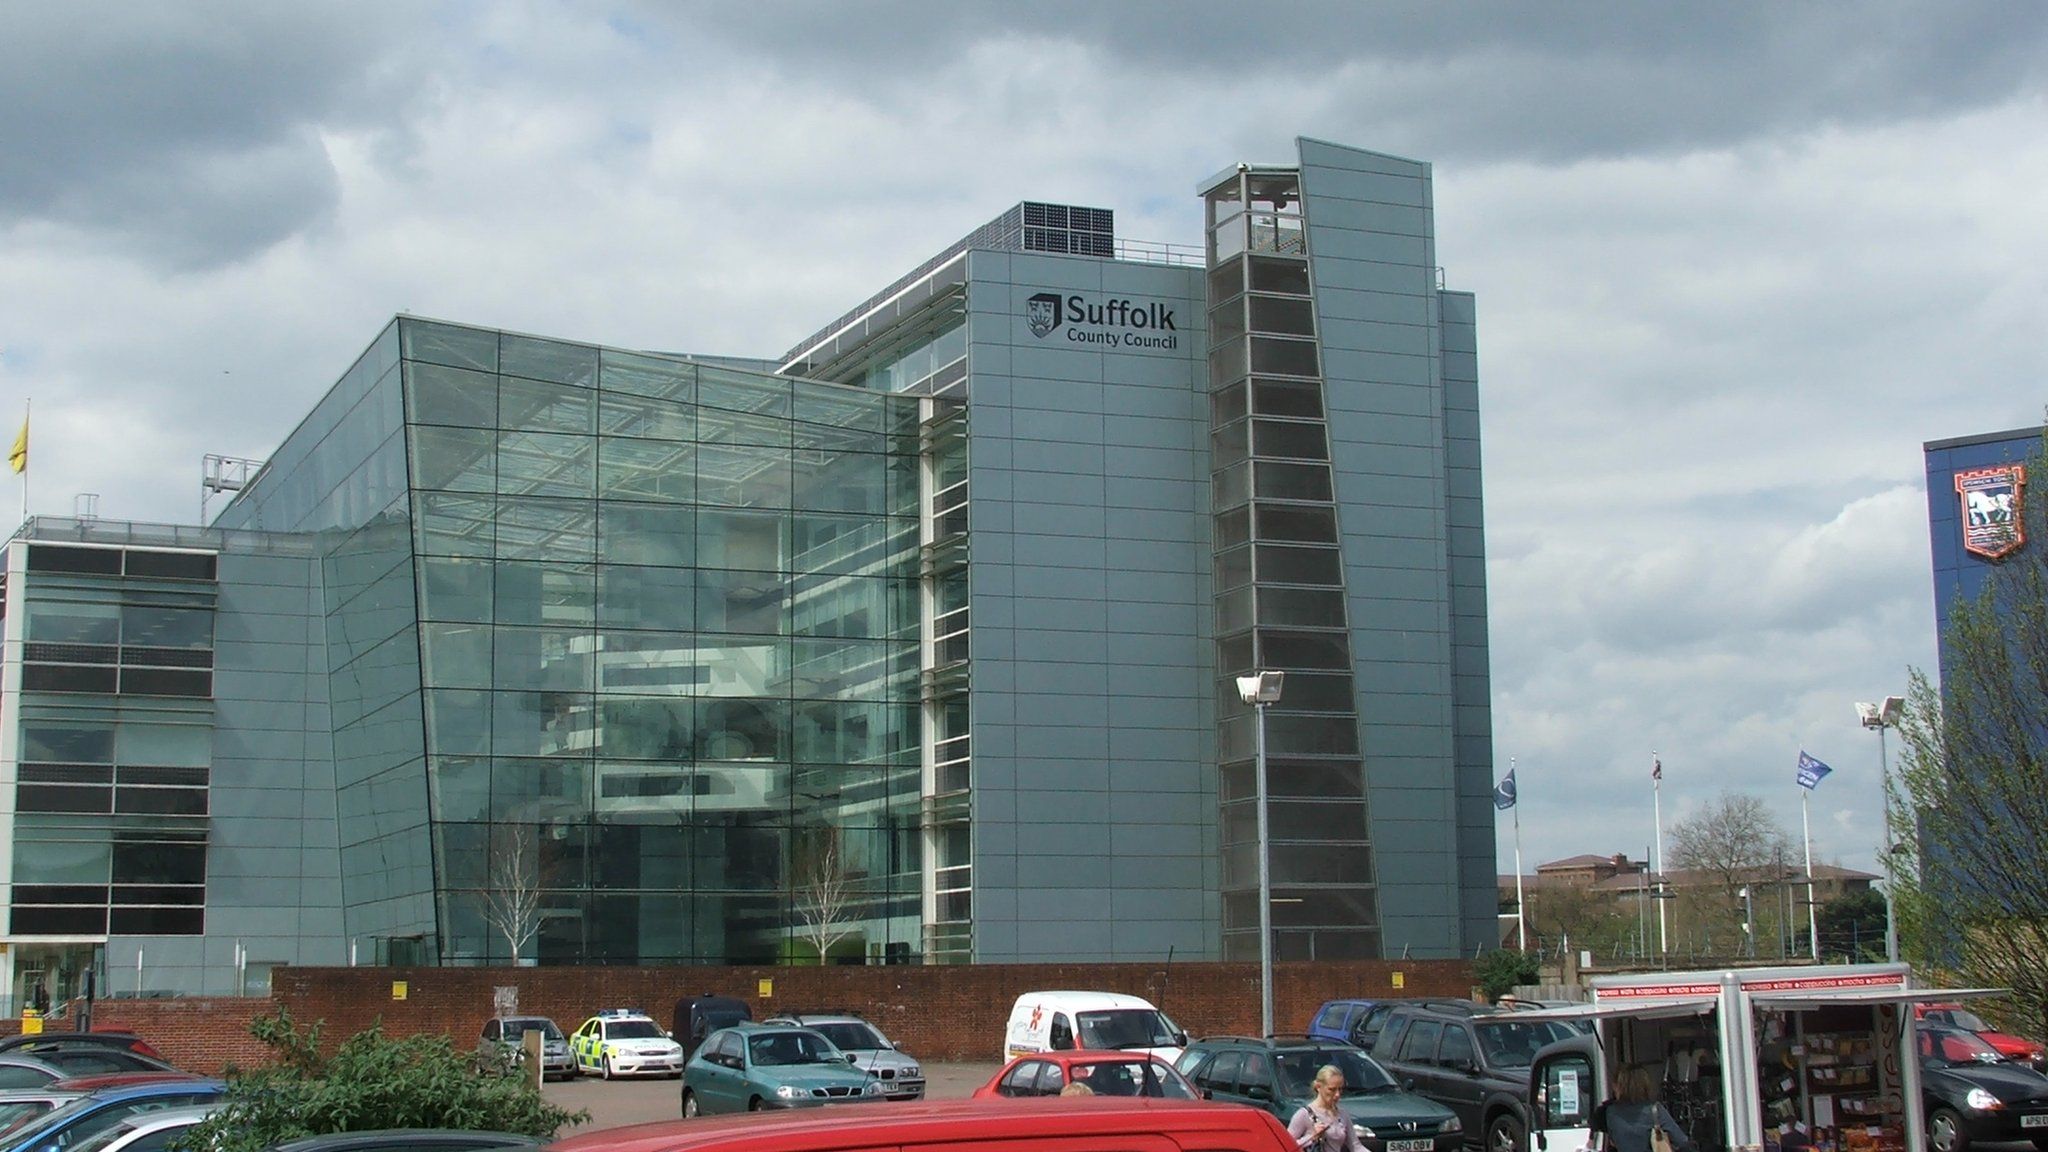 Suffolk County Council's Endeavour House